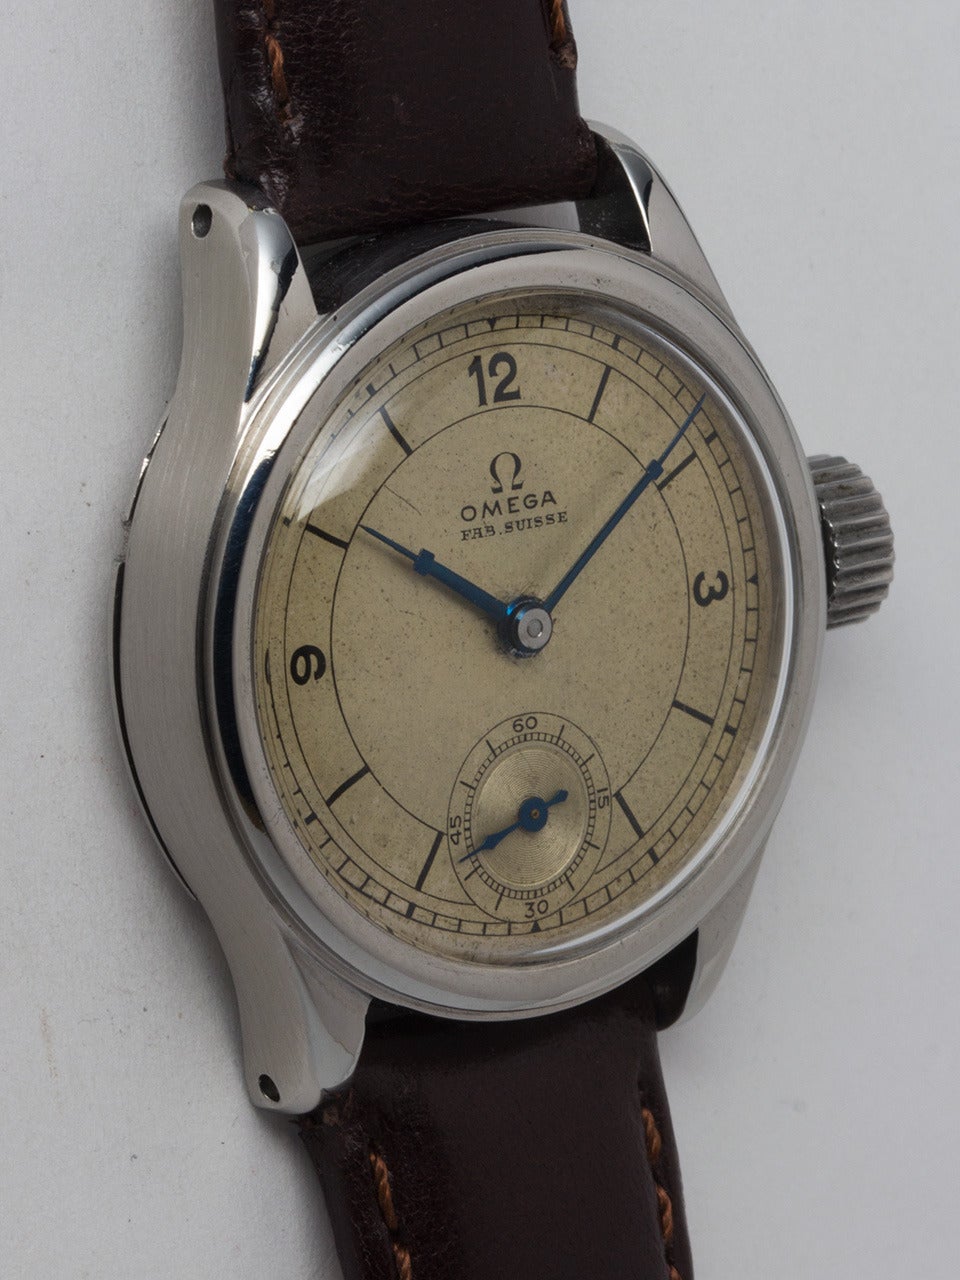 Omega stainless steel medium-size military-style wristwatch, circa 1942. 31 X 36mm case with wide bezel and oversized crown. With very pleasing original patina'd dial with black numerals. Powered by an Omega 26.5 T3 manual-wind movement with